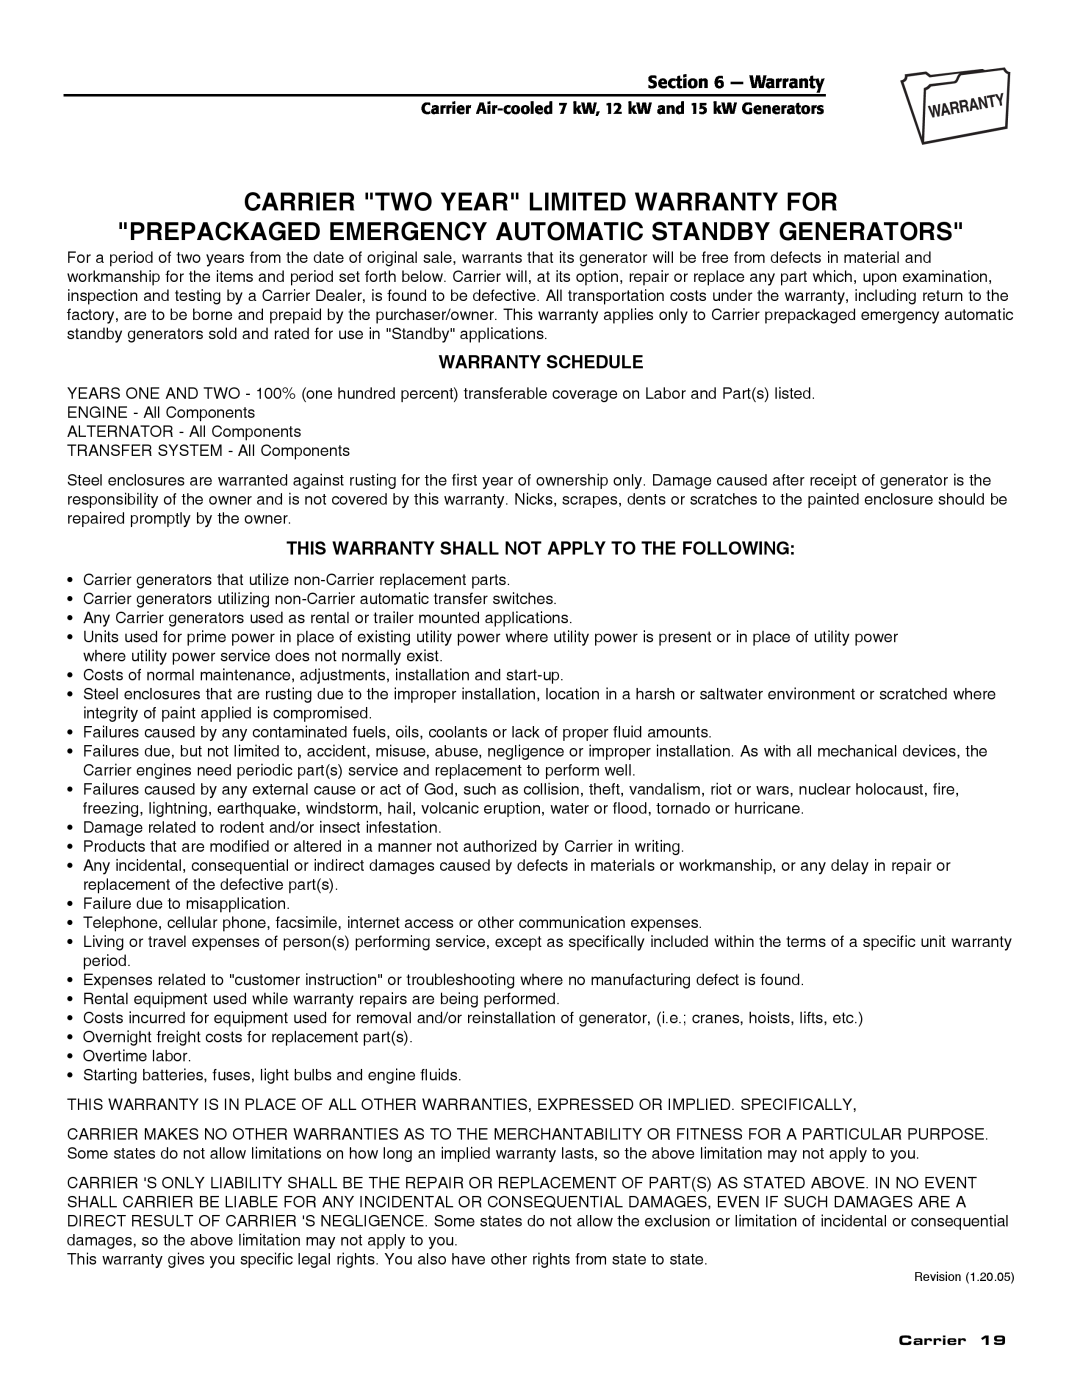 Carrier ASPAS1CCA007 owner manual Carrier Two Year Limited Warranty For, Warranty Schedule 